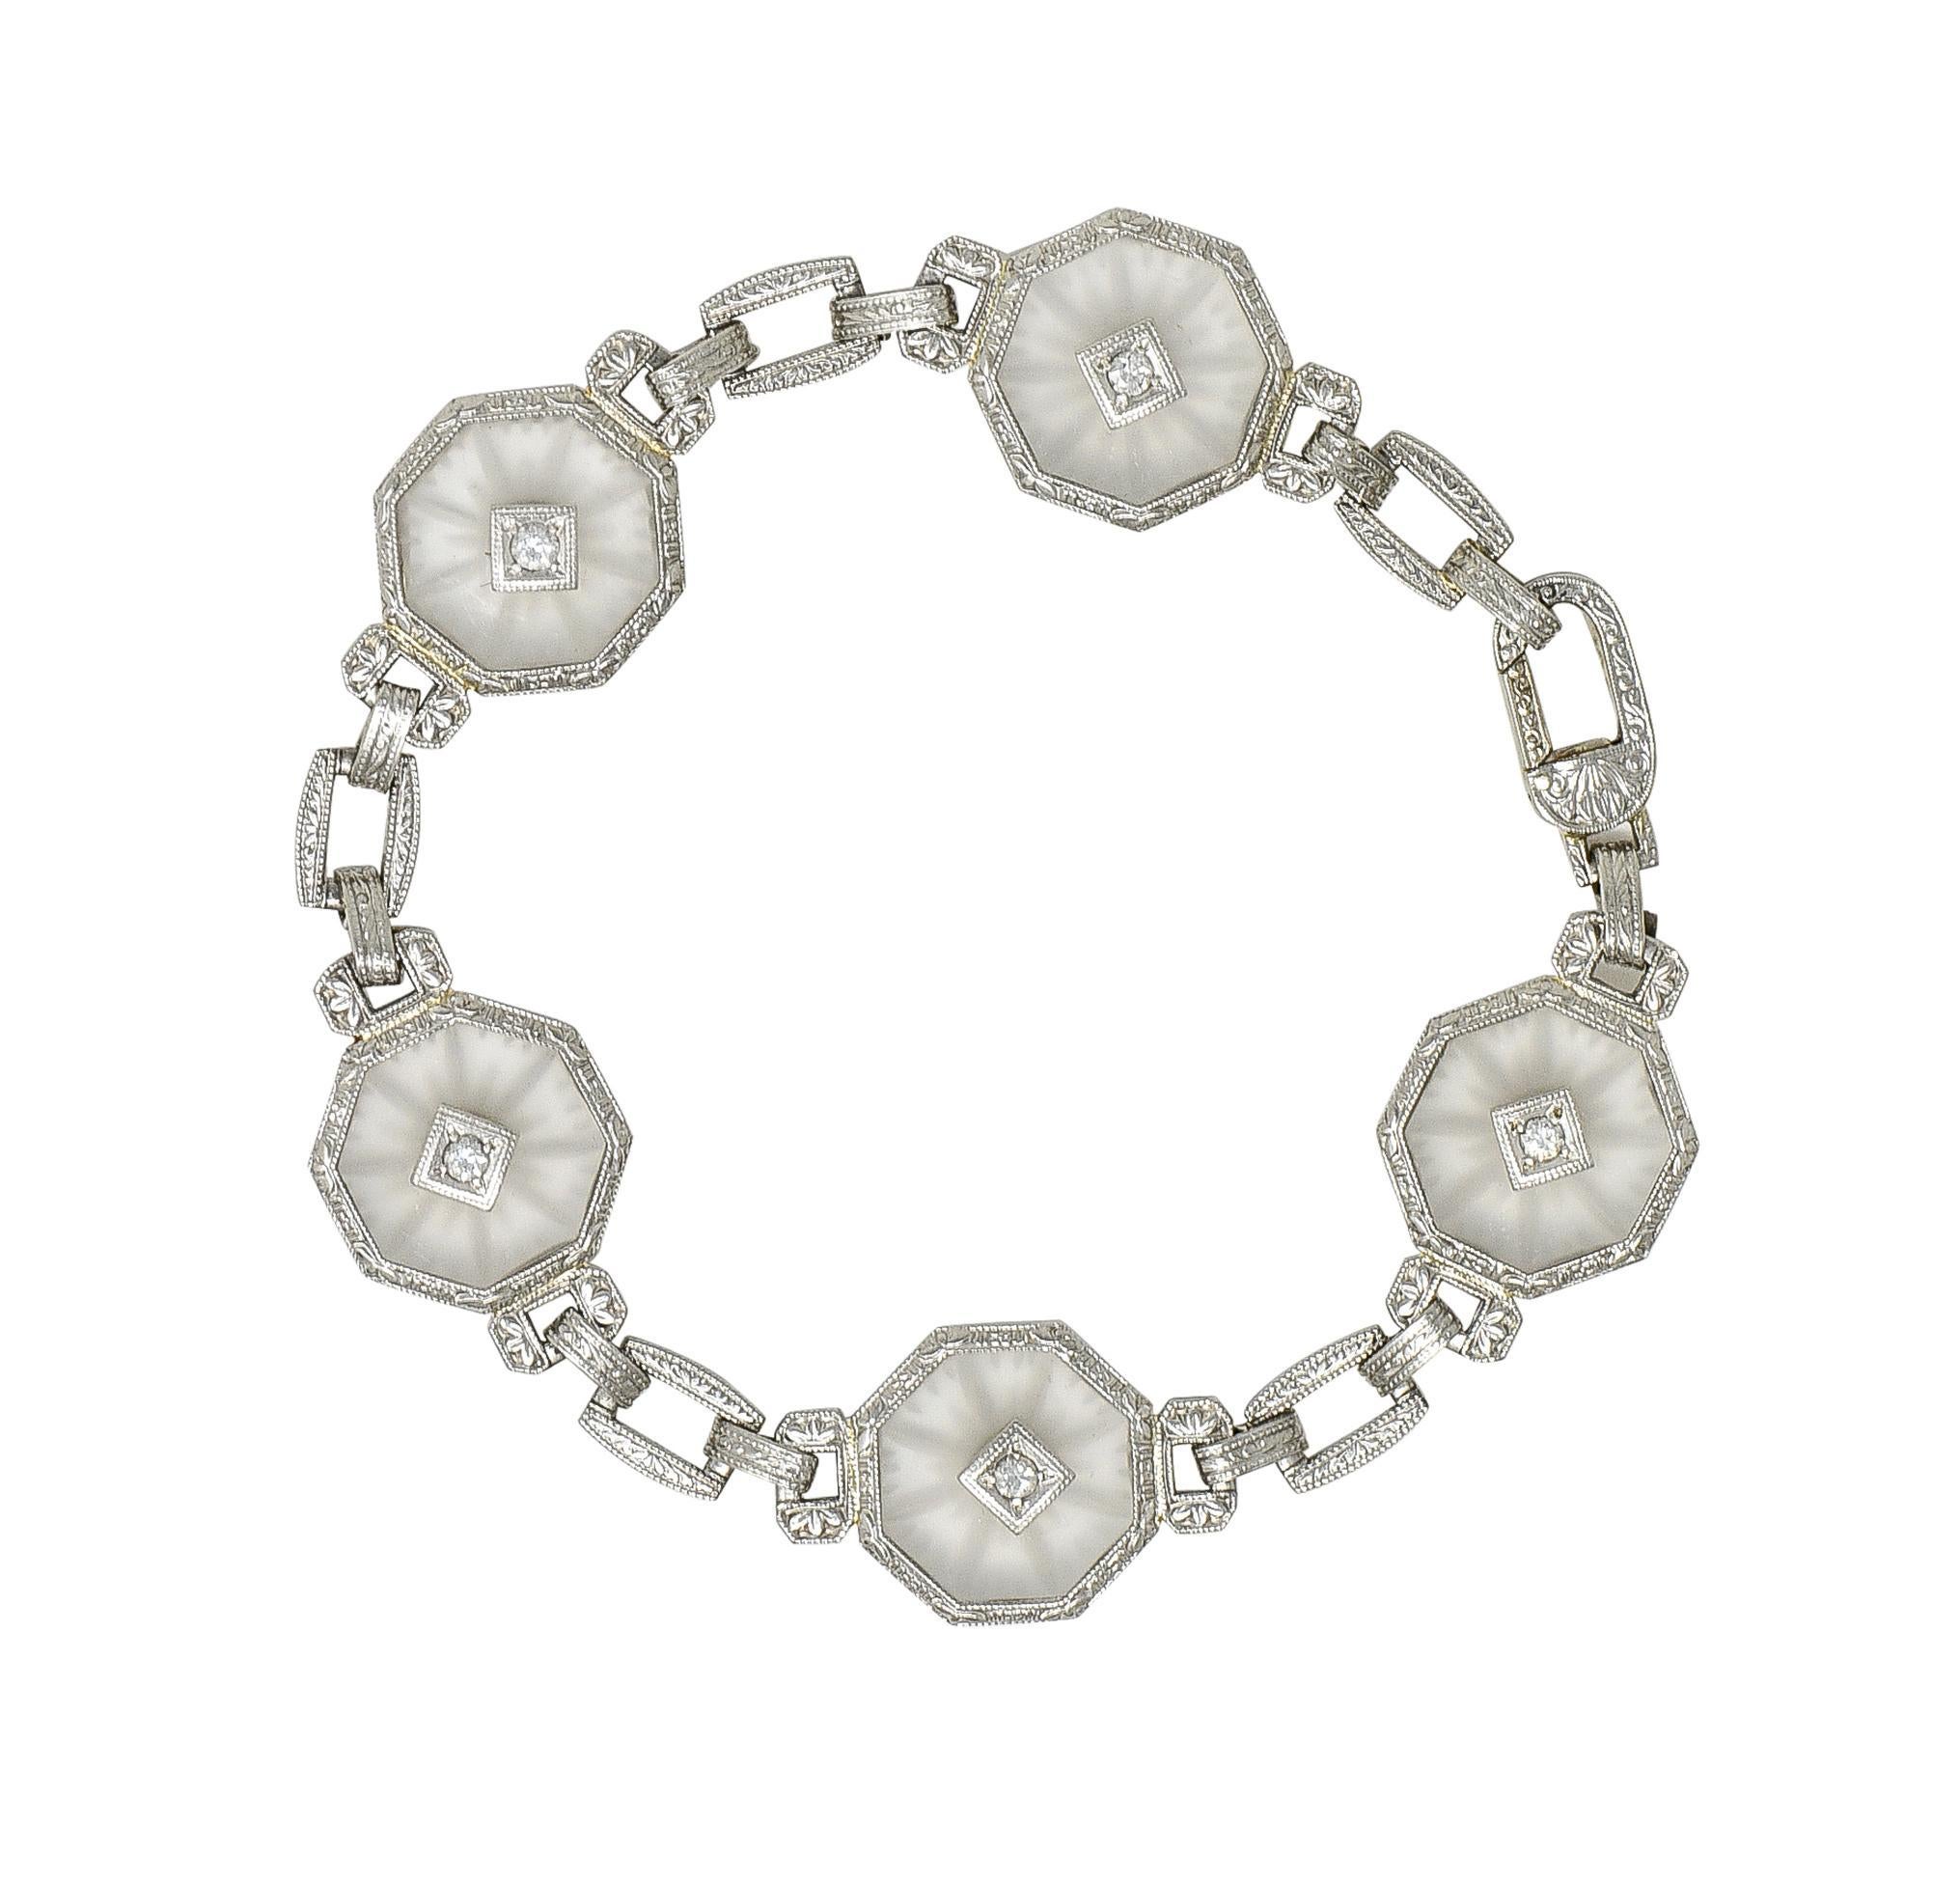 Comprised of pierced rectangular link chain featuring five hexagonal camphor glass stations
Measuring 13.0 x 13.0 mm - transparent with frosted matte finish and engraved burst motif
Each centering a single cut diamond - weighing approximately 0.15